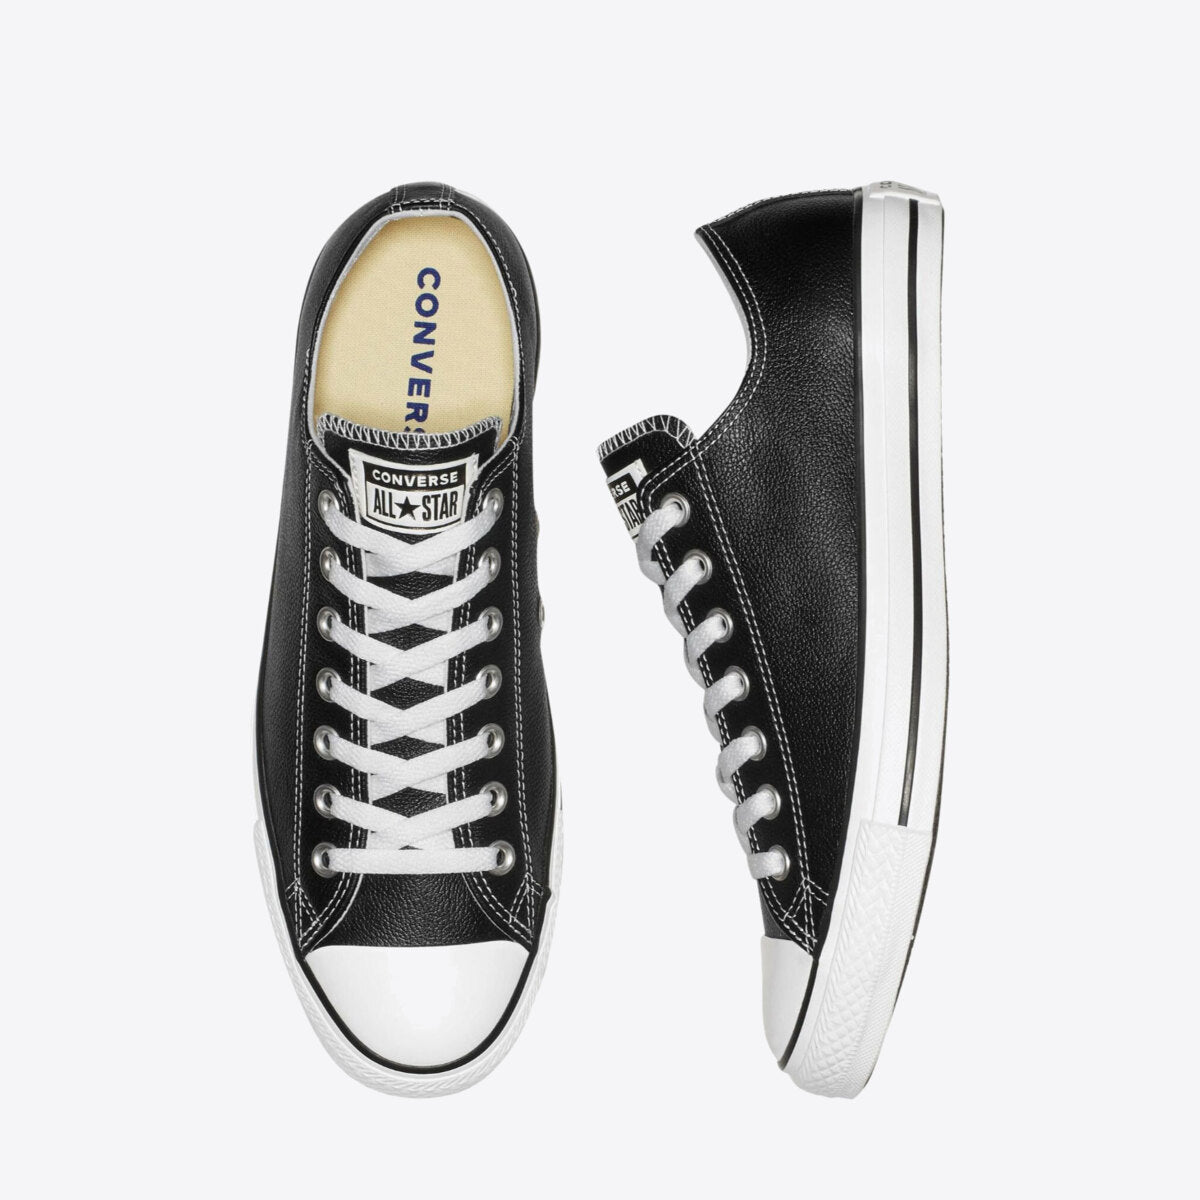  Chuck Taylor All Star Leather Low Top Black